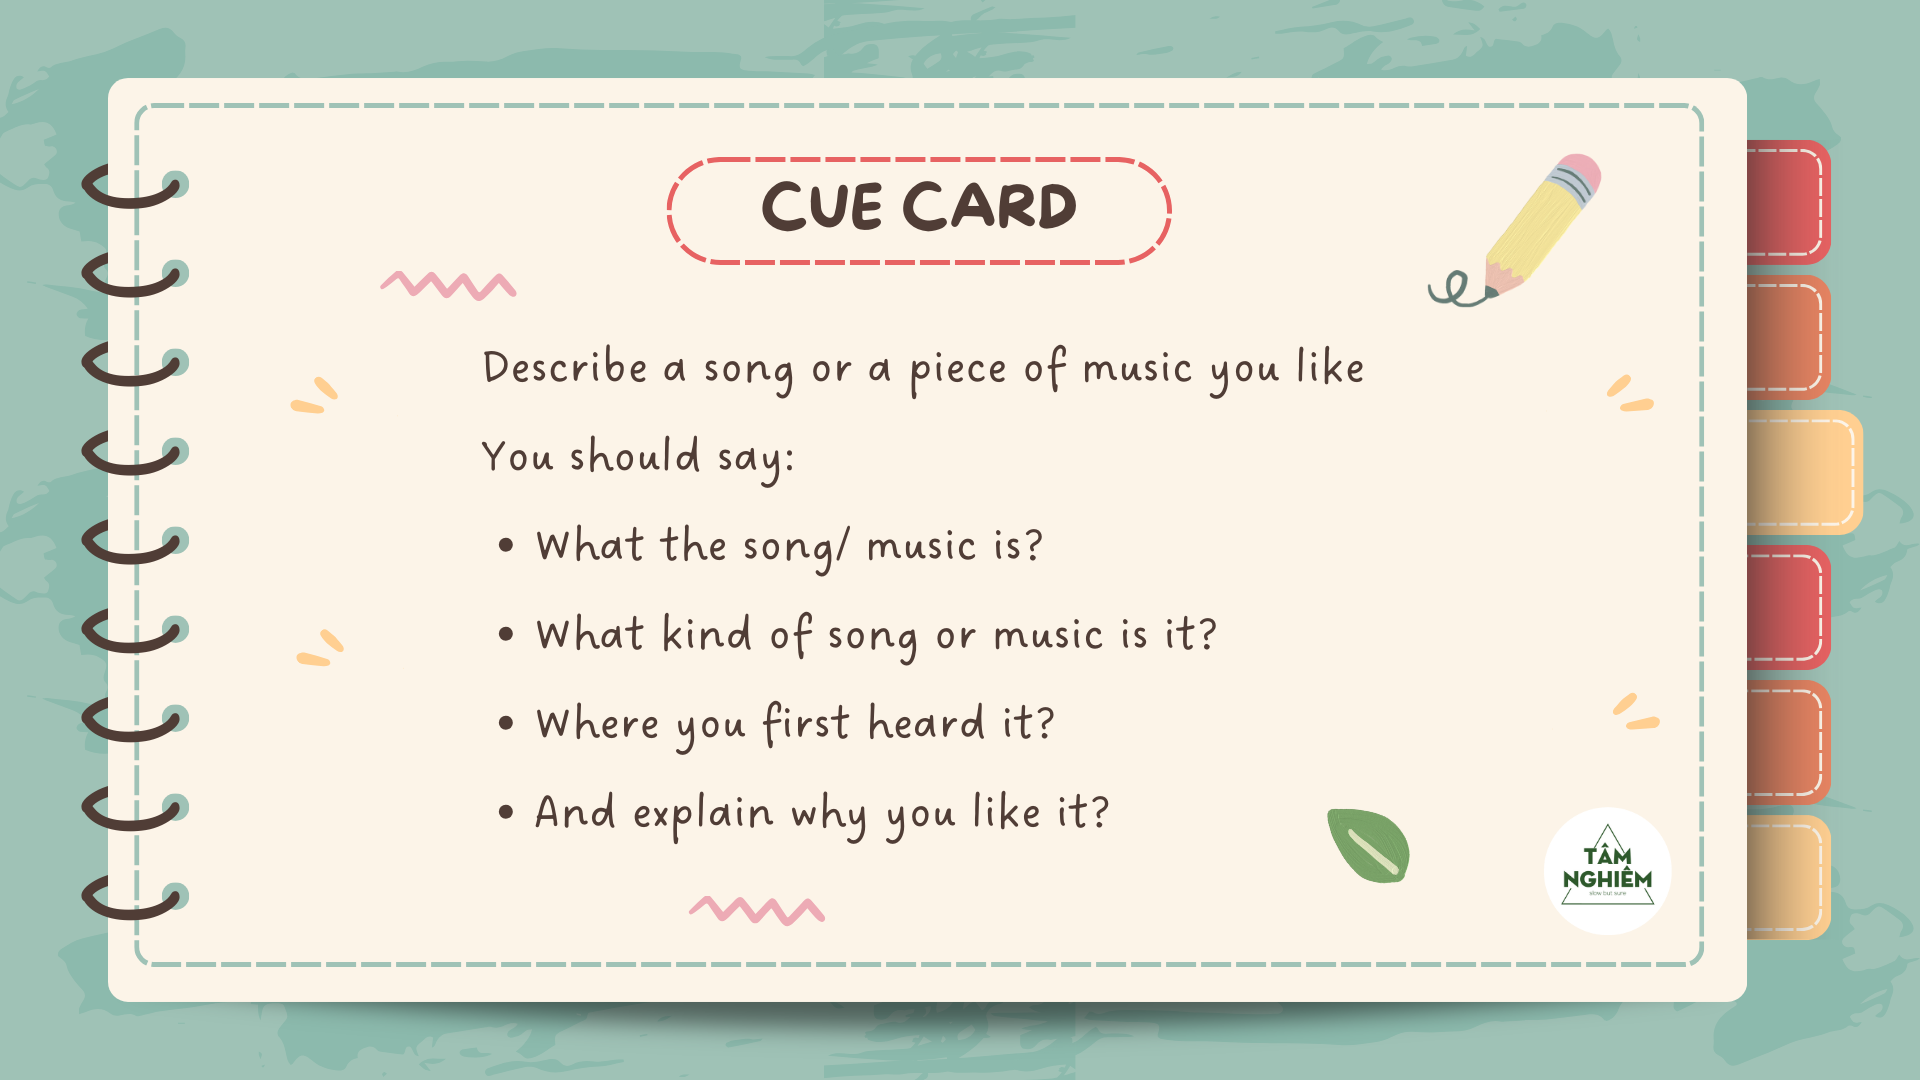 Cue Card Sample Answer Topic 8 - Describe a song or a piece of music you like